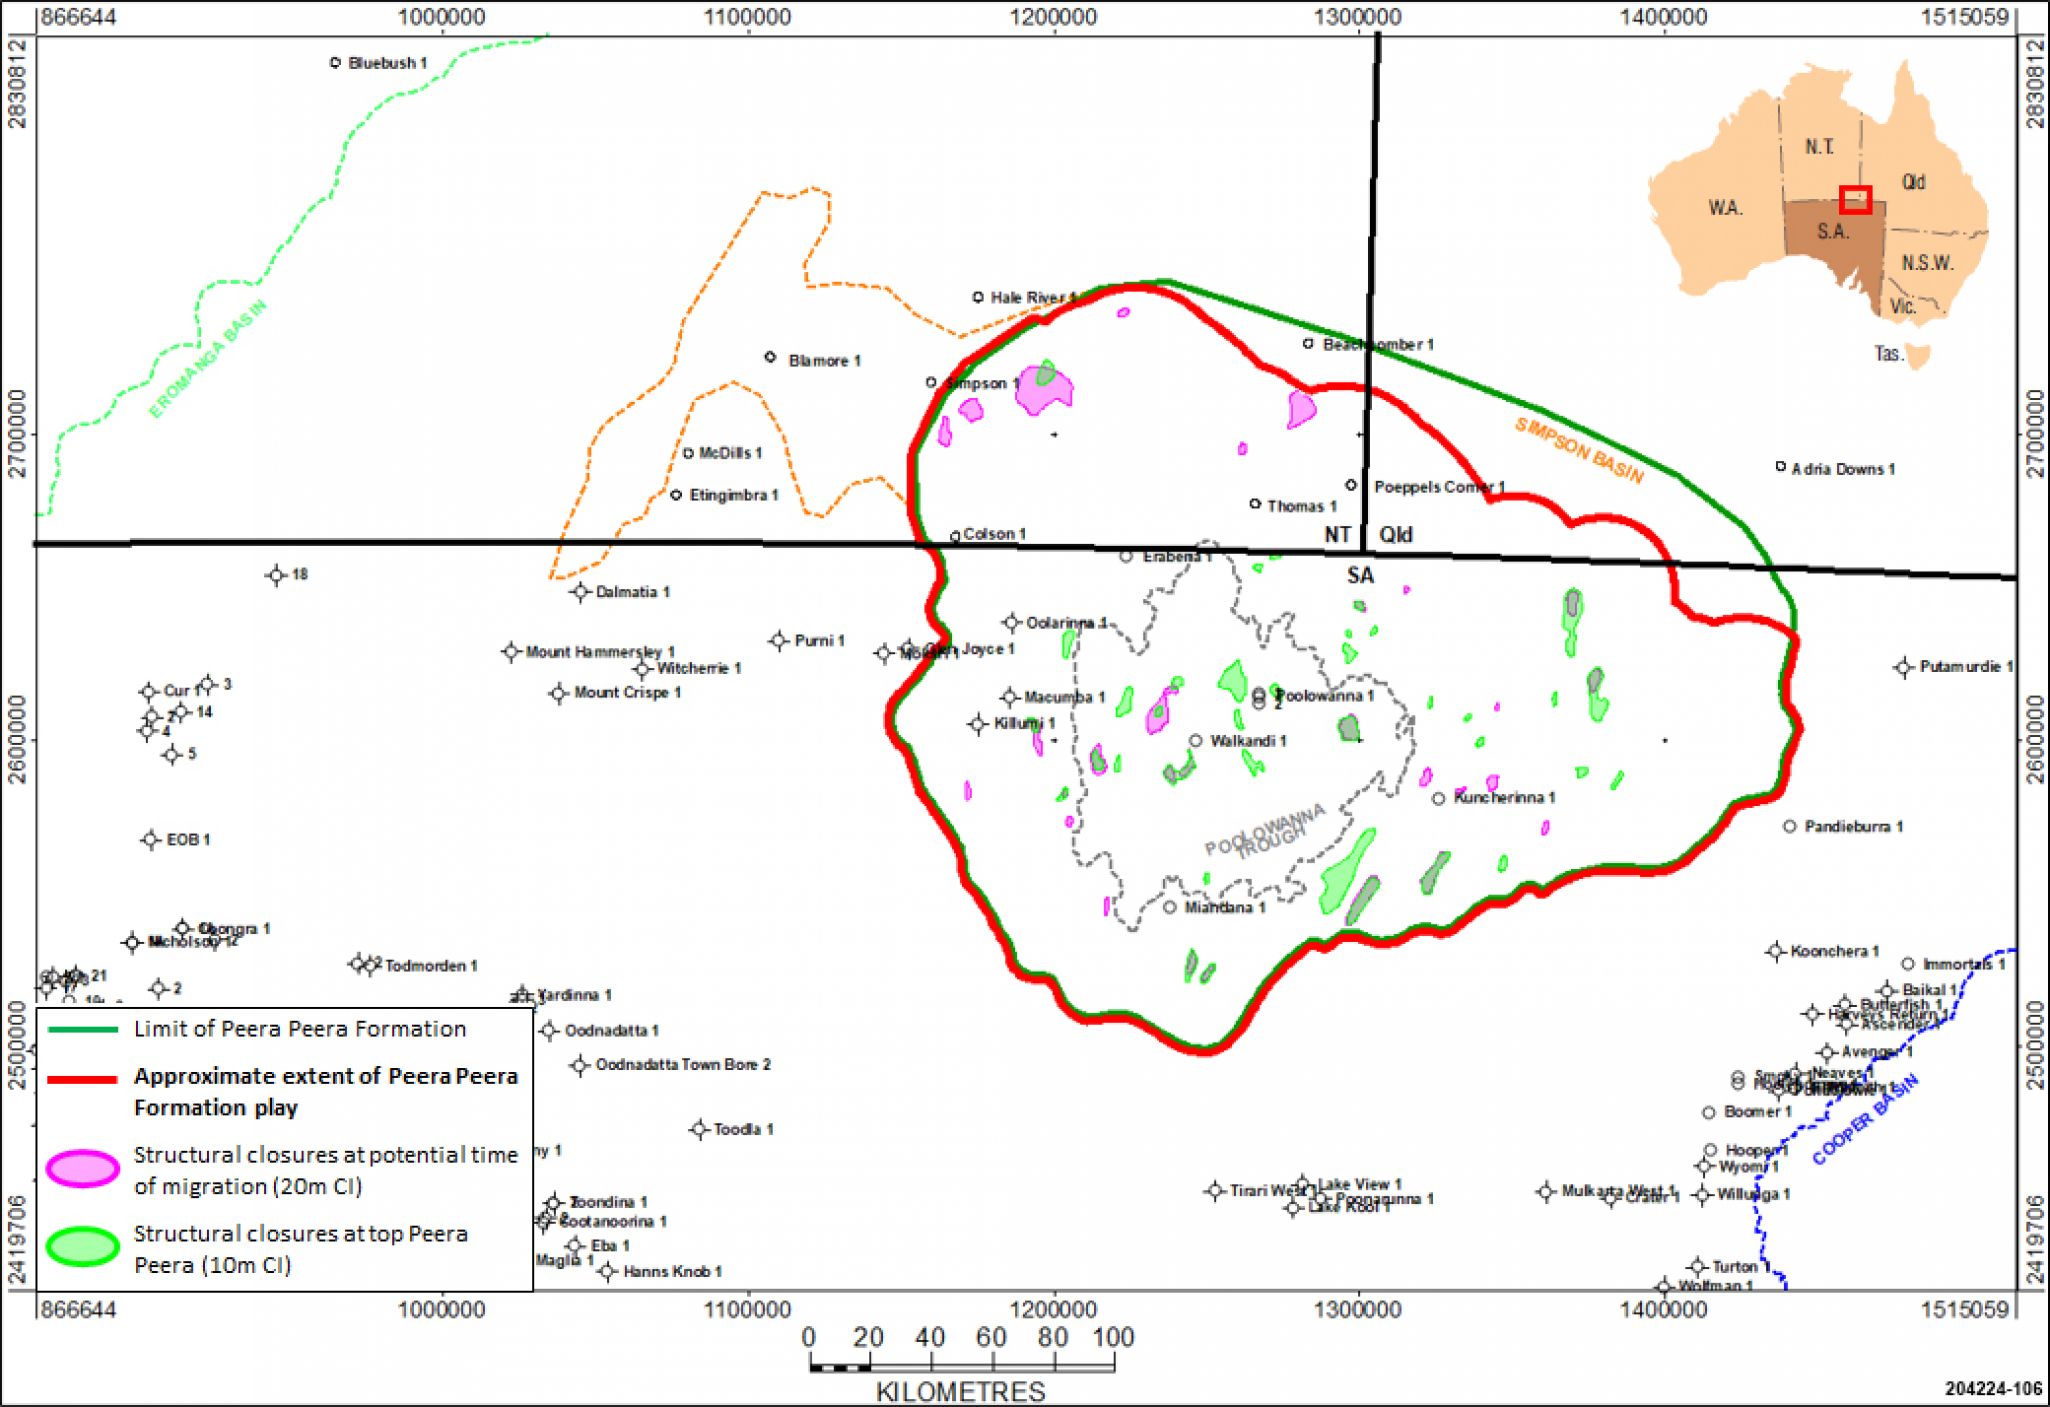 Structures within the Peera Peera Formation play area at time of hydrocarbon migration (pink) and Present Day (green)